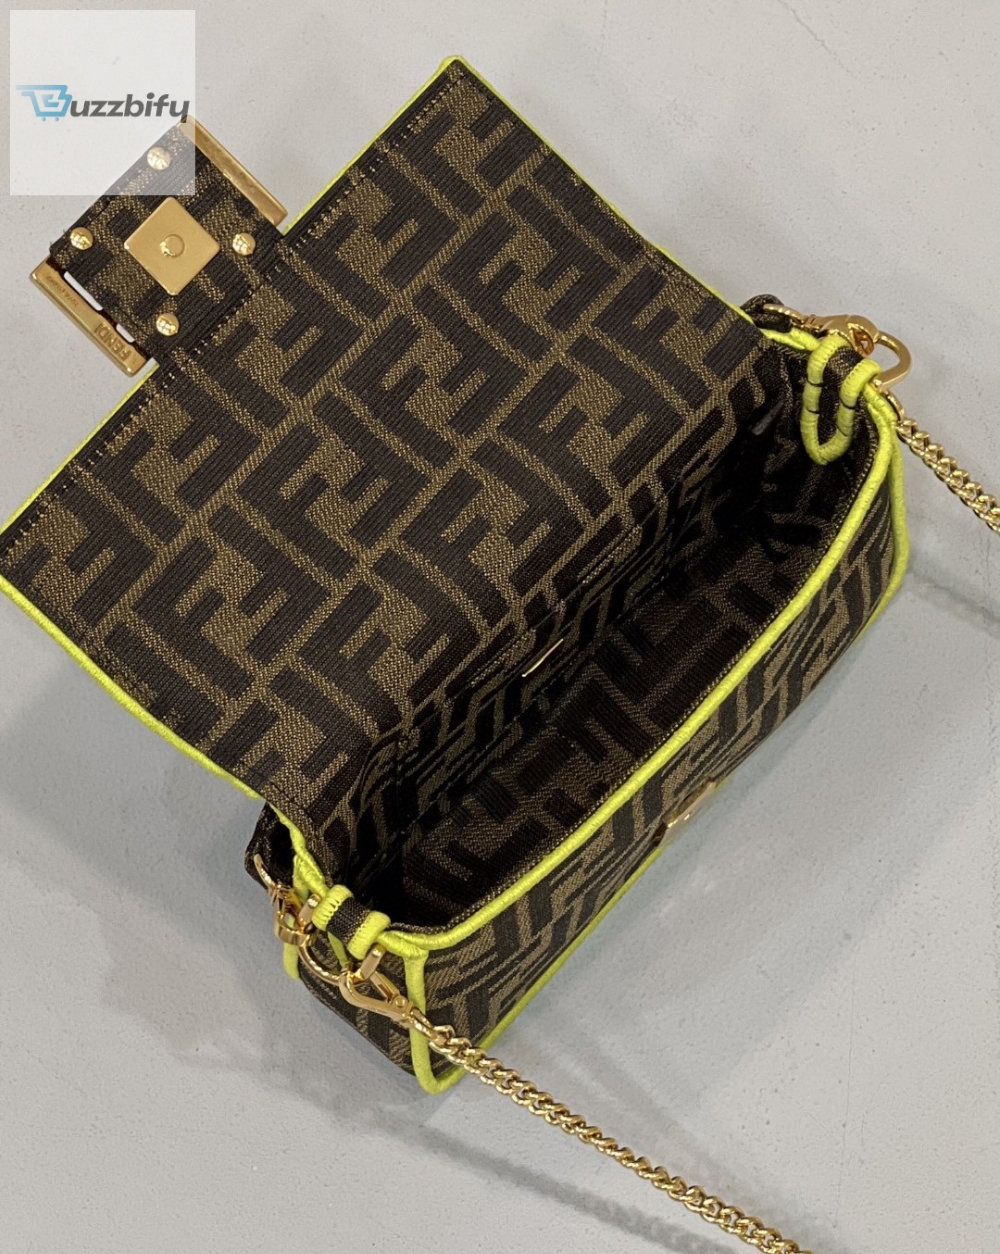 Fendi Baguette Small Brown Fabric Yellow Border Bag For Woman 18Cm7in